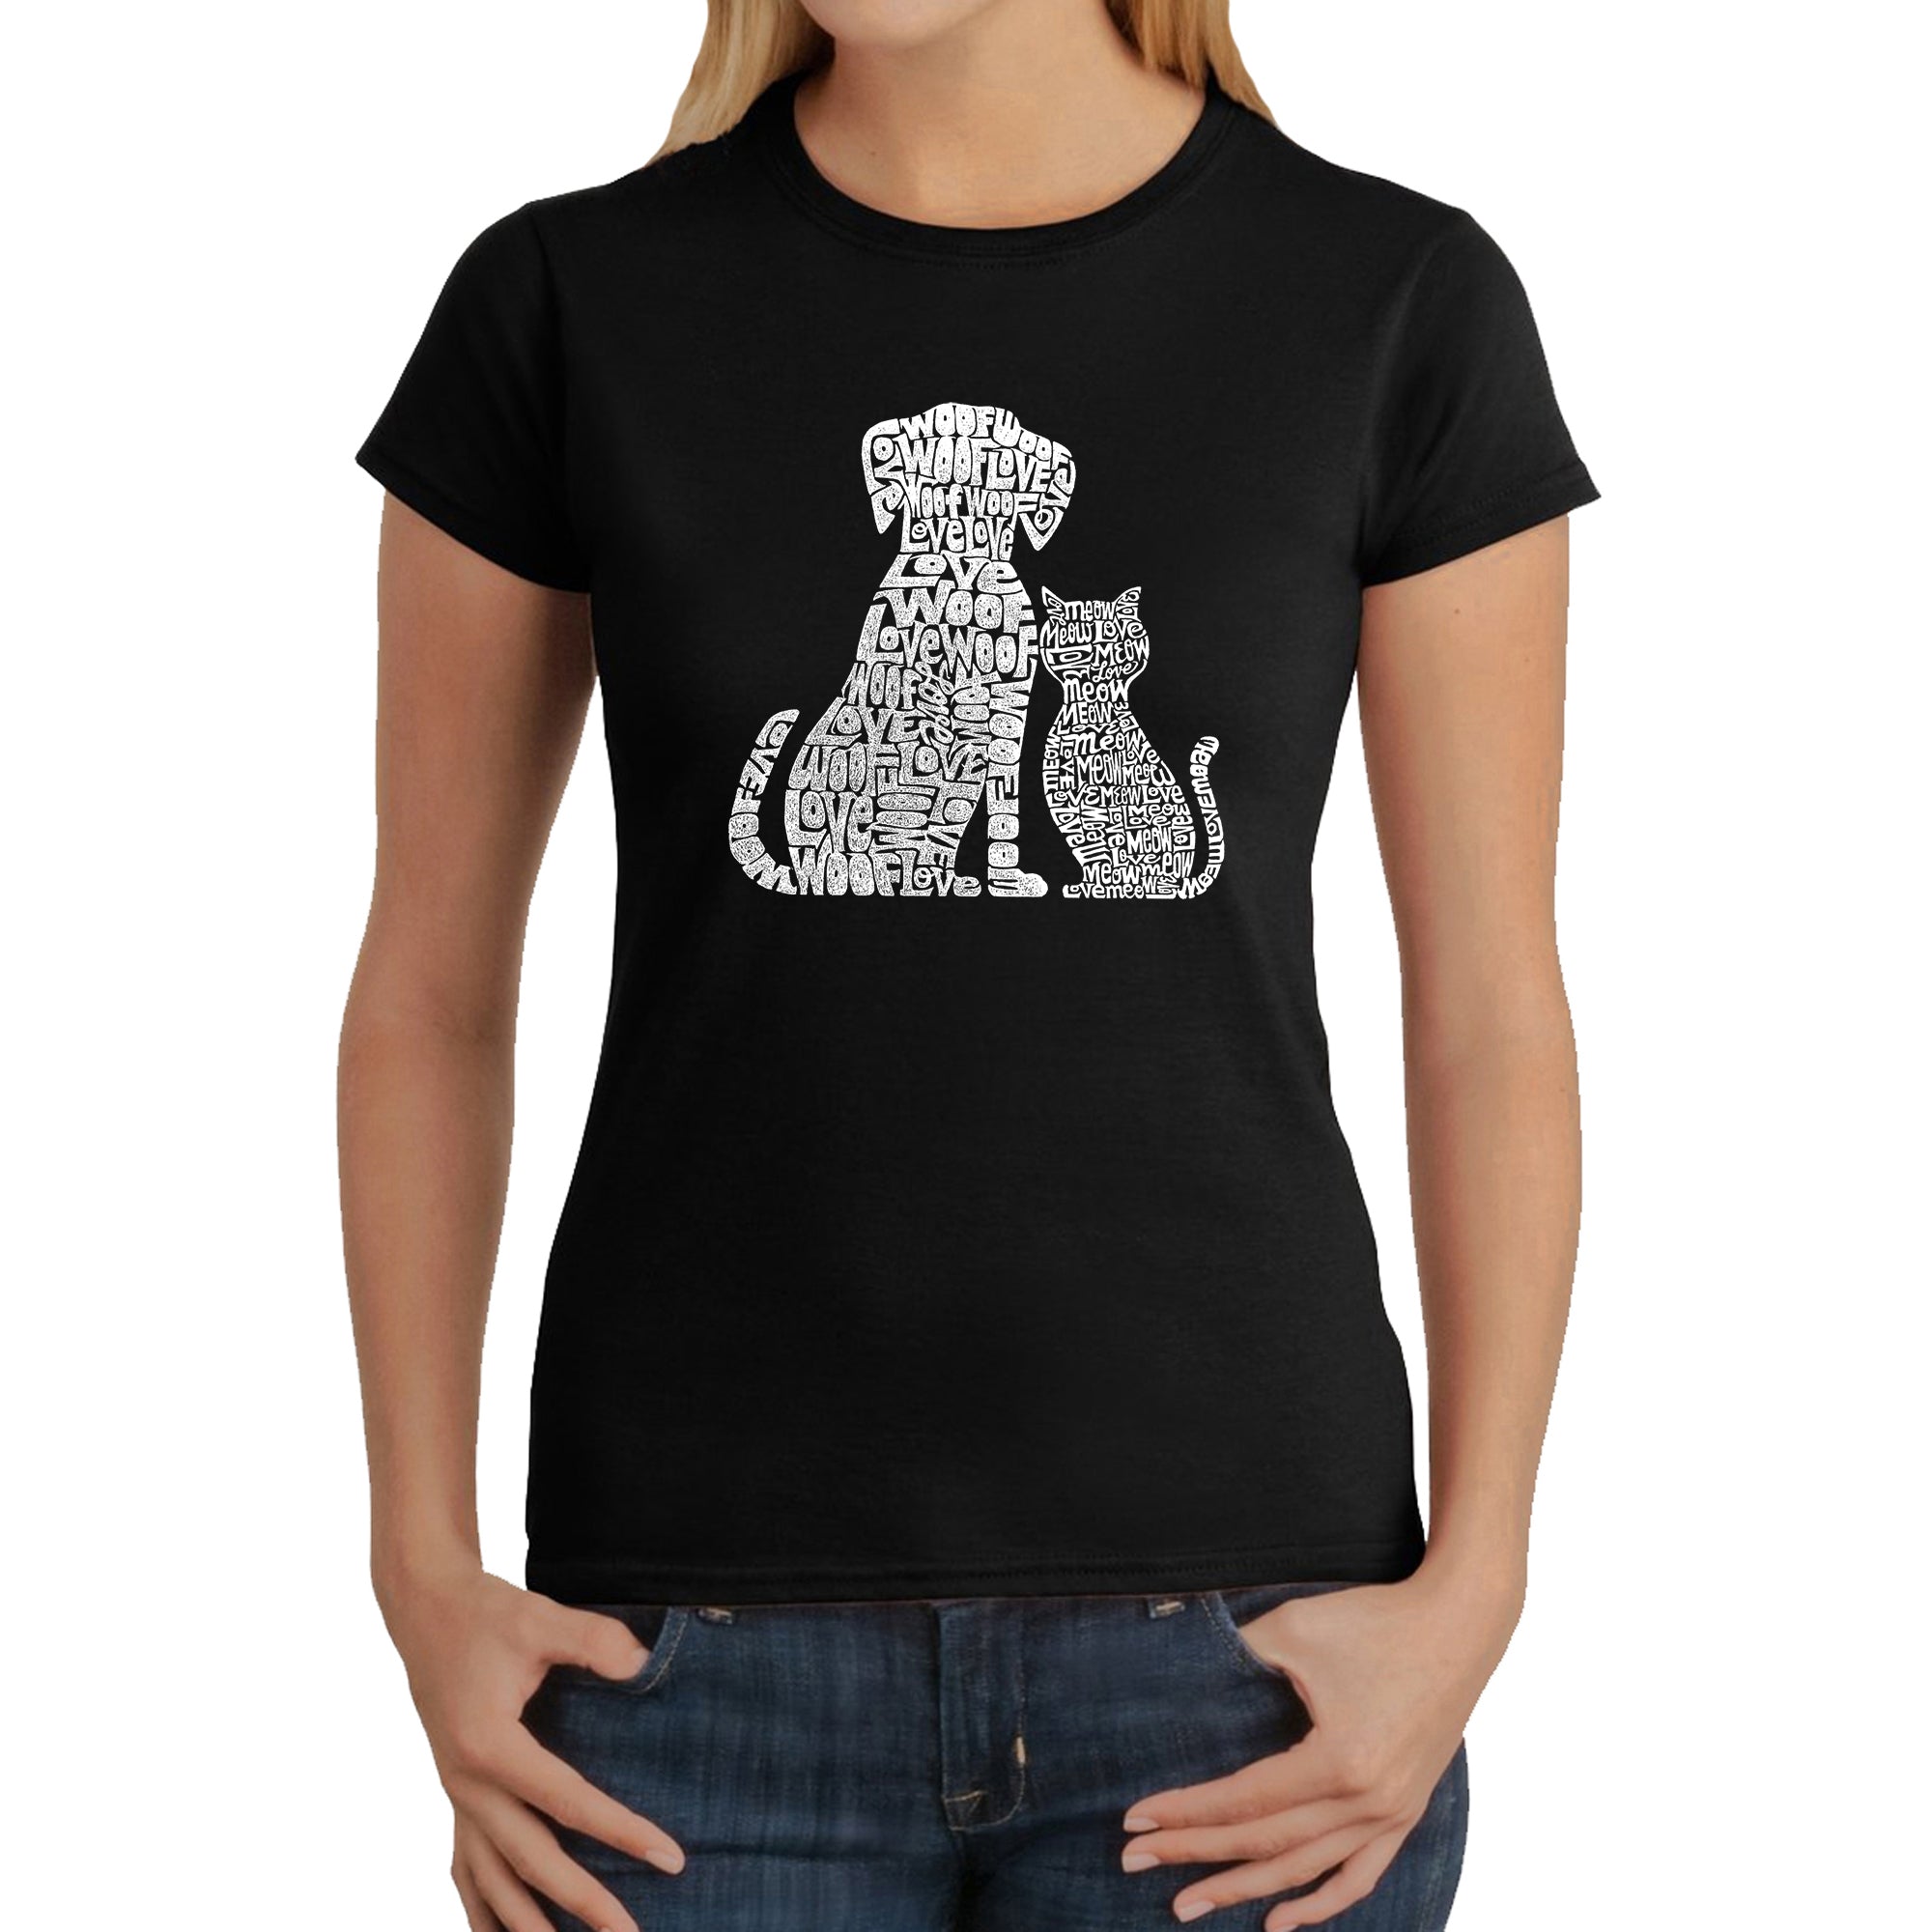 Dogs And Cats - Women's Word Art T-Shirt - Black - X-Large